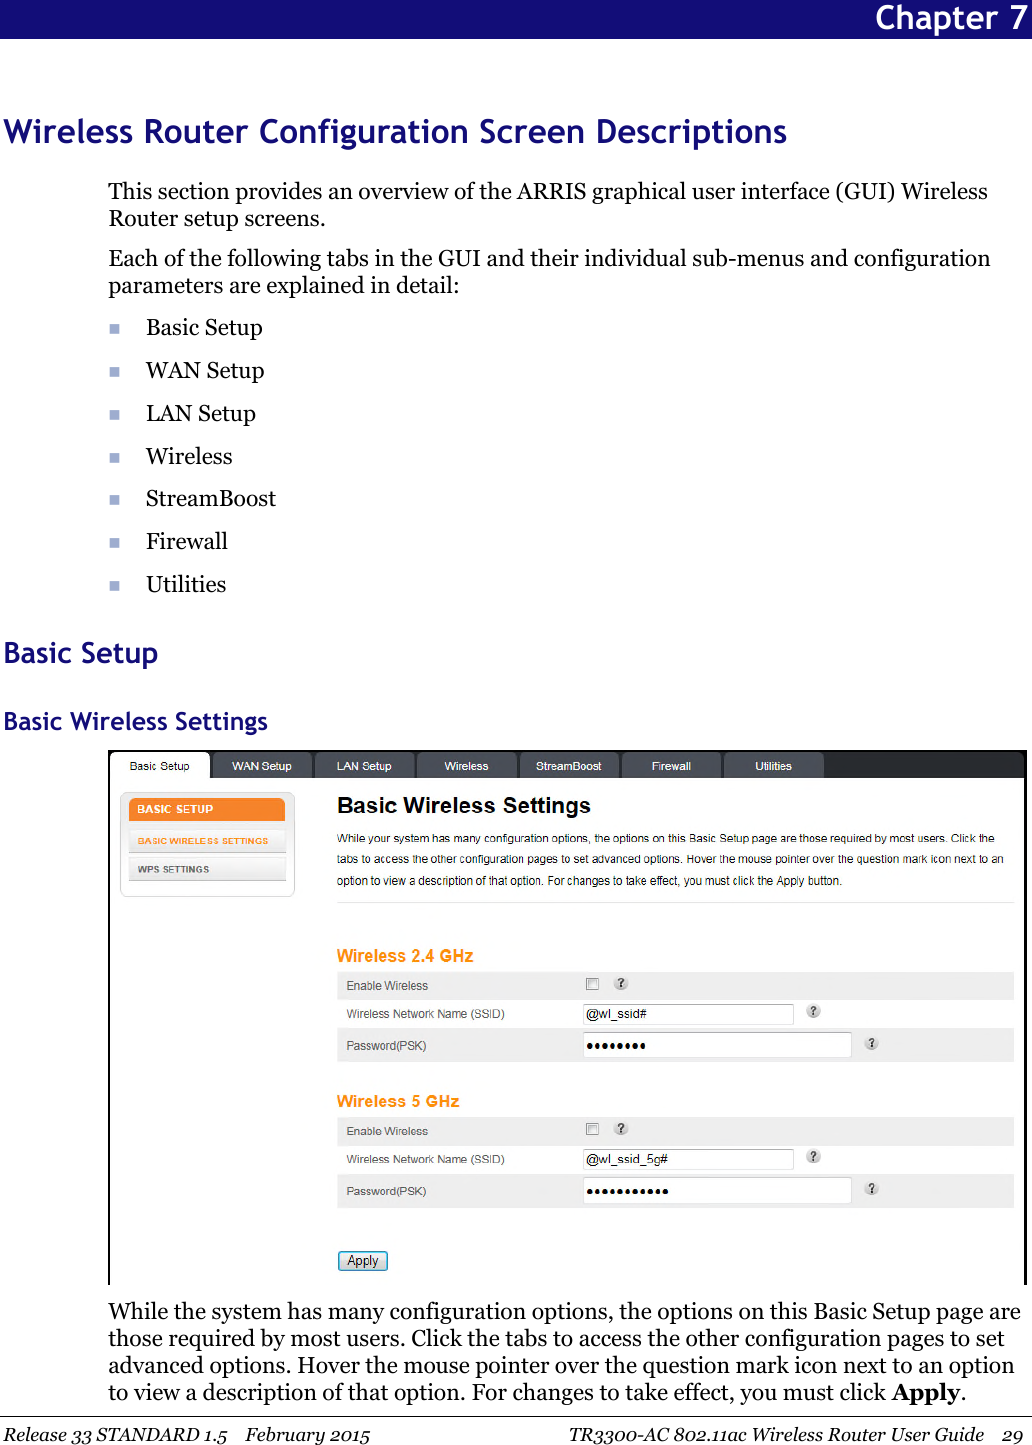 Release 33 STANDARD 1.5 February 2015 TR3300-AC 802.11ac Wireless Router User Guide 29Chapter 7Wireless Router Configuration Screen DescriptionsThis section provides an overview of the ARRIS graphical user interface (GUI) WirelessRouter setup screens.Each of the following tabs in the GUI and their individual sub-menus and configurationparameters are explained in detail:Basic SetupWAN SetupLAN SetupWirelessStreamBoostFirewallUtilitiesBasic SetupBasic Wireless SettingsWhile the system has many configuration options, the options on this Basic Setup page arethose required by most users. Click the tabs to access the other configuration pages to setadvanced options. Hover the mouse pointer over the question mark icon next to an optionto view a description of that option. For changes to take effect, you must click Apply.